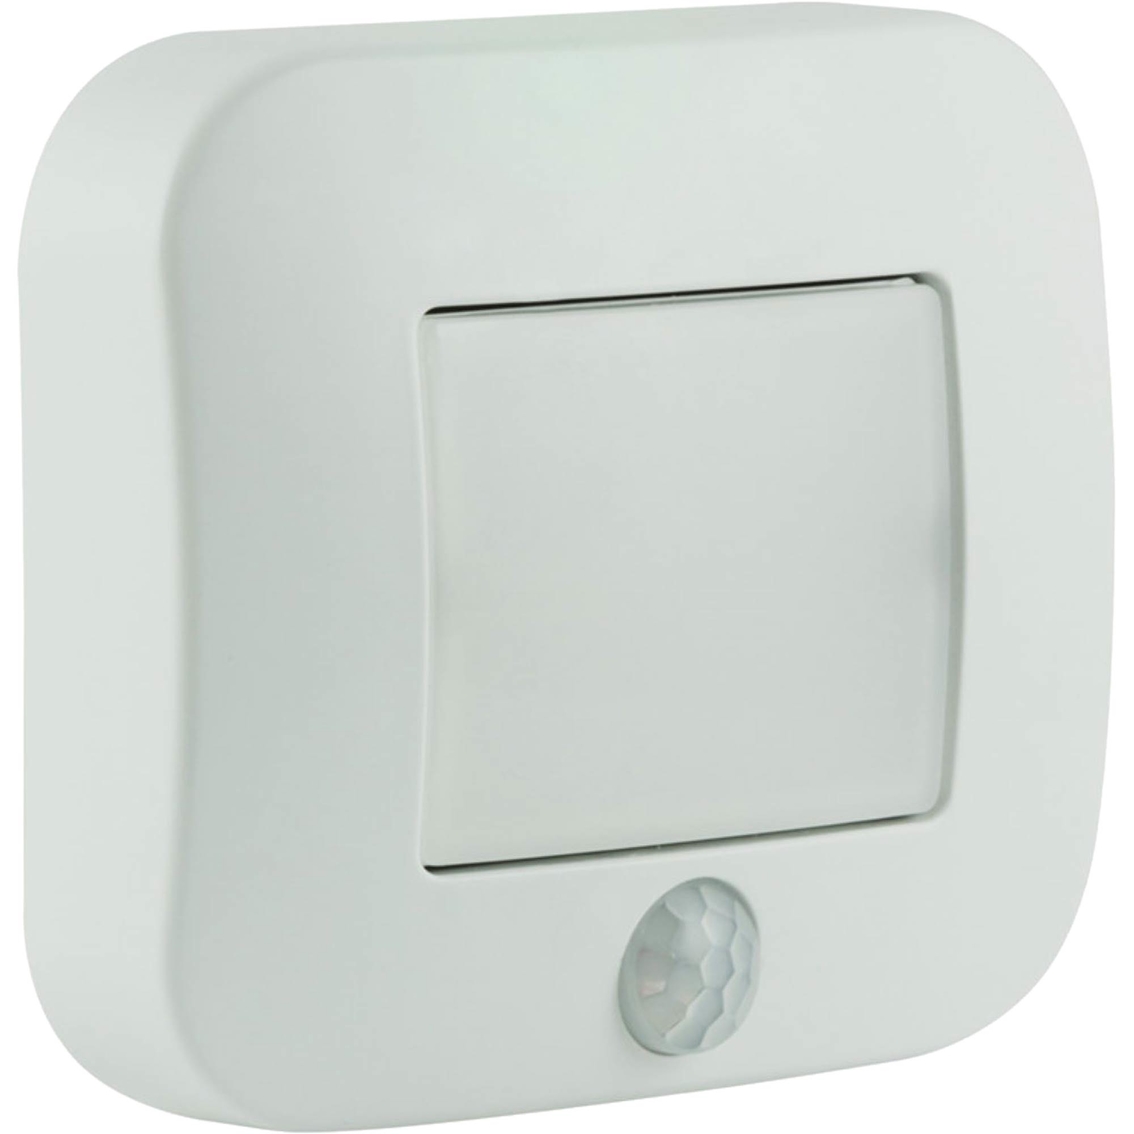 motion activated light control outdoor